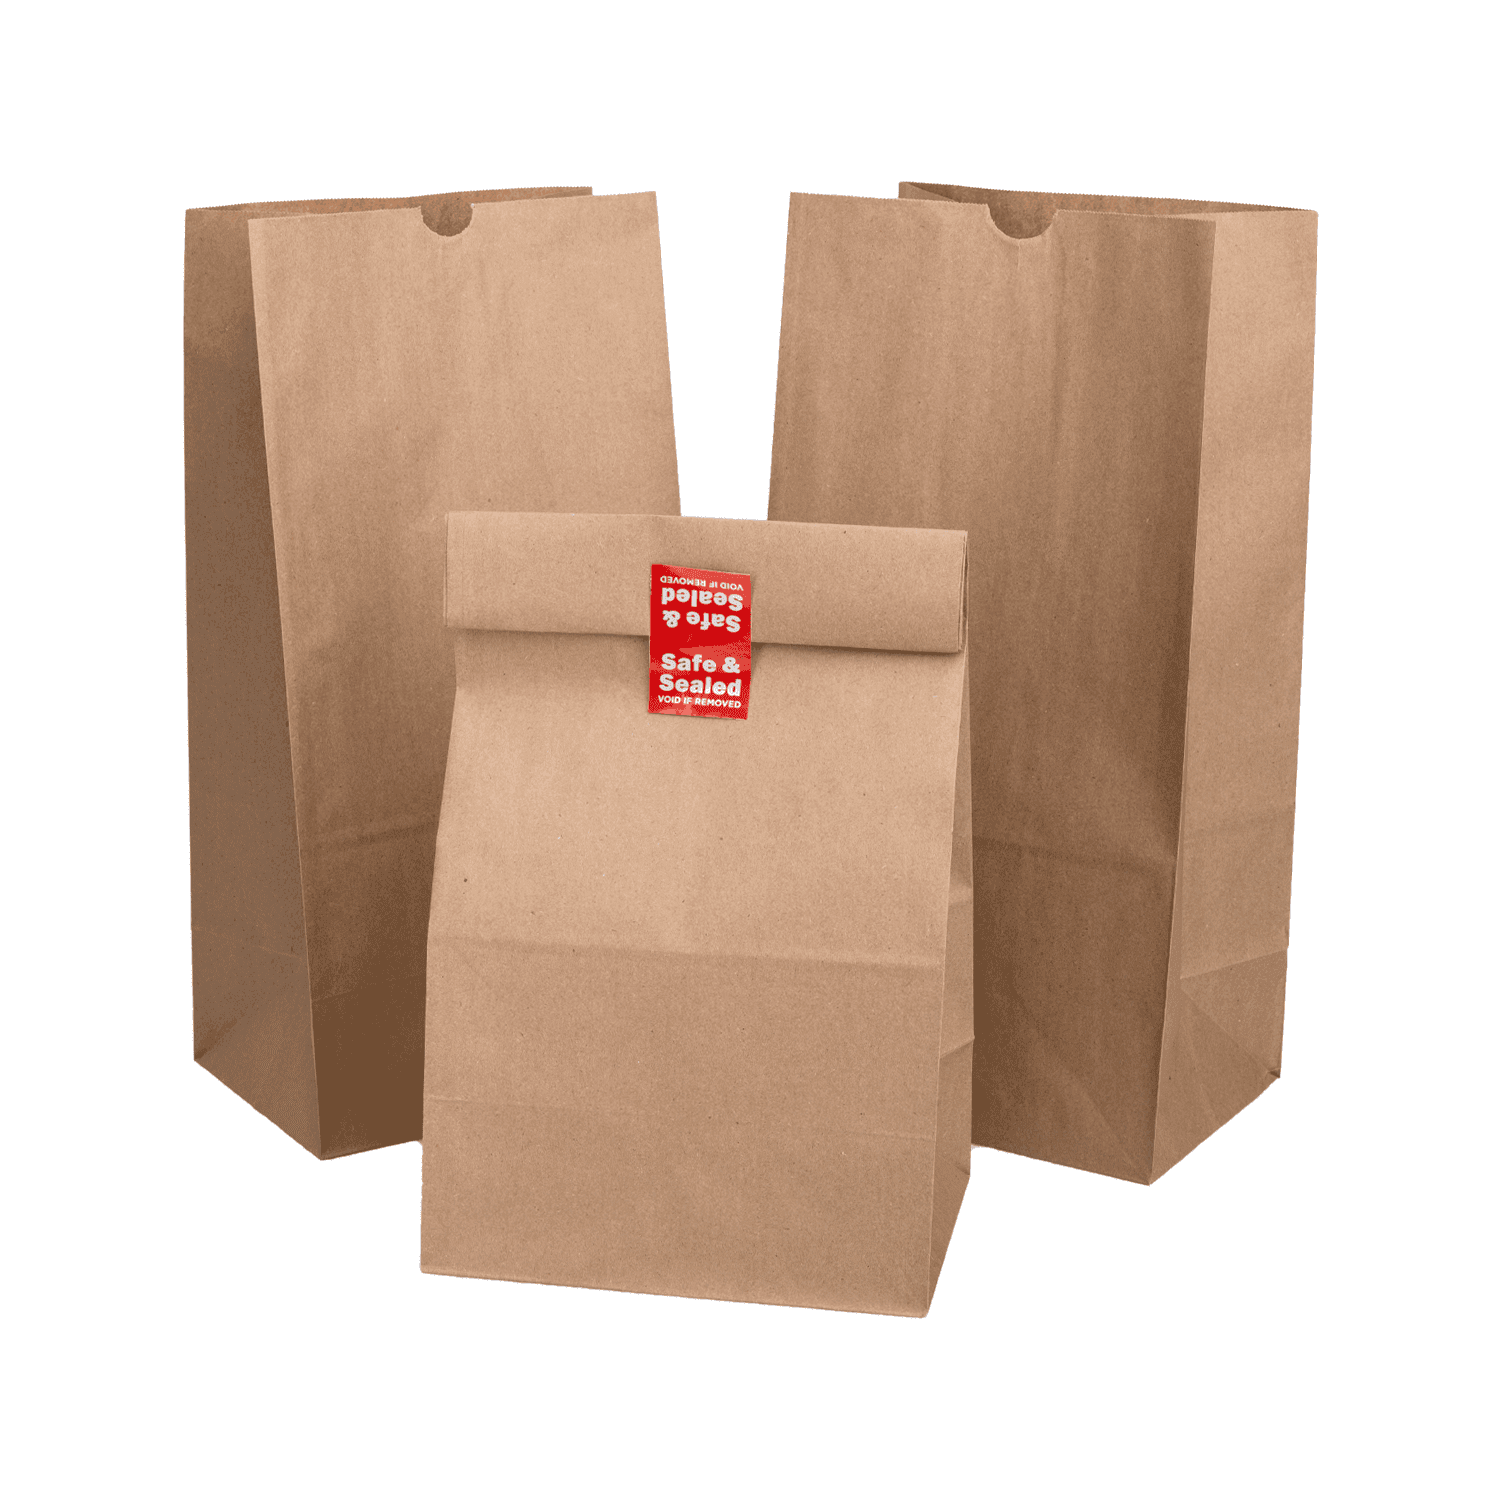 Craft paper bags • Compare & find best prices today »